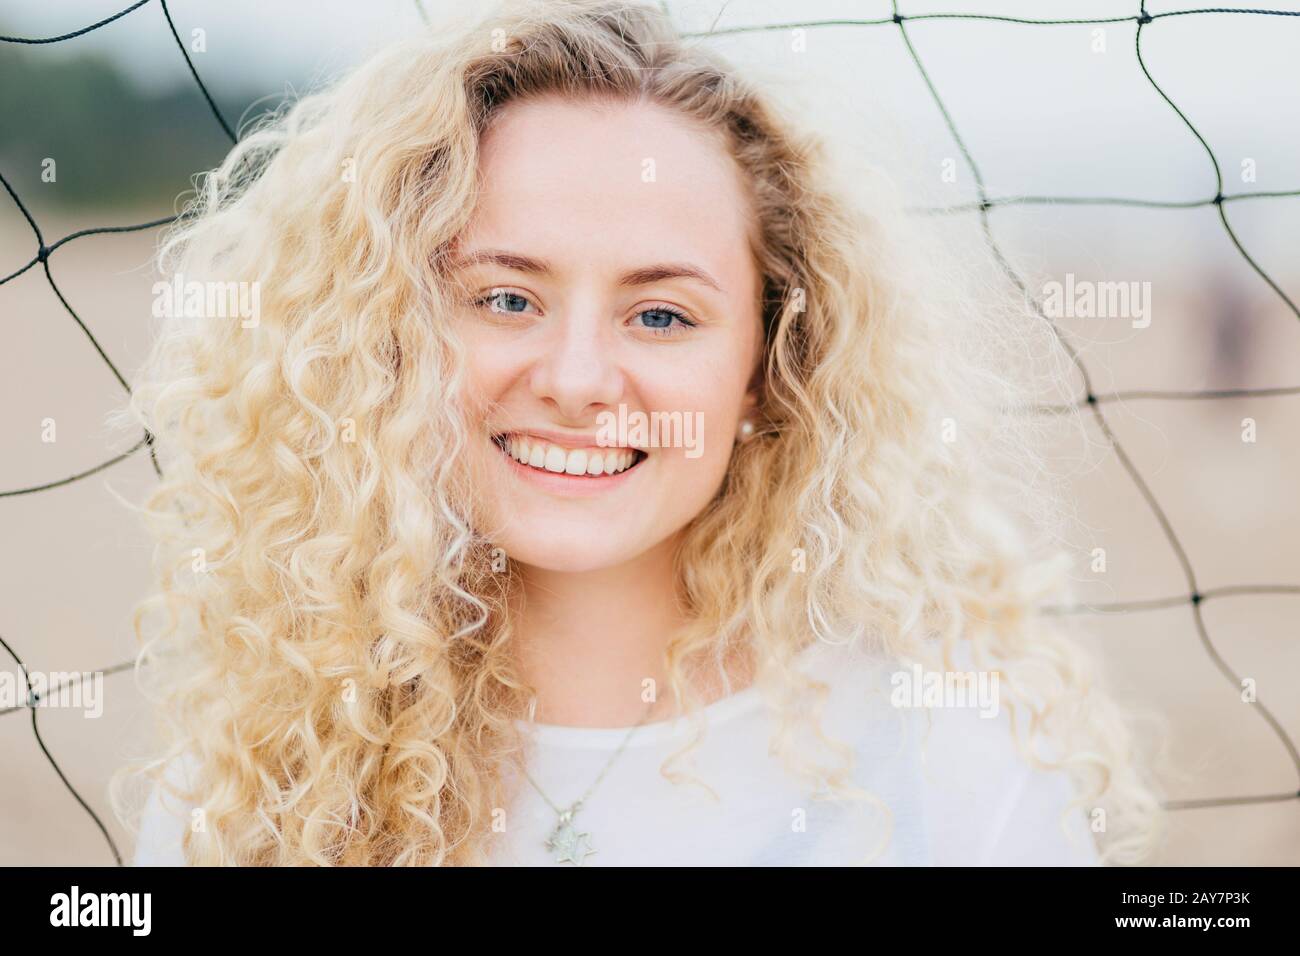 Lovely cute young woman has fresh skin, curly light hair, smiles gladfully, dressed in casual clothes, stands near tennis net, being satisfied to reci Stock Photo